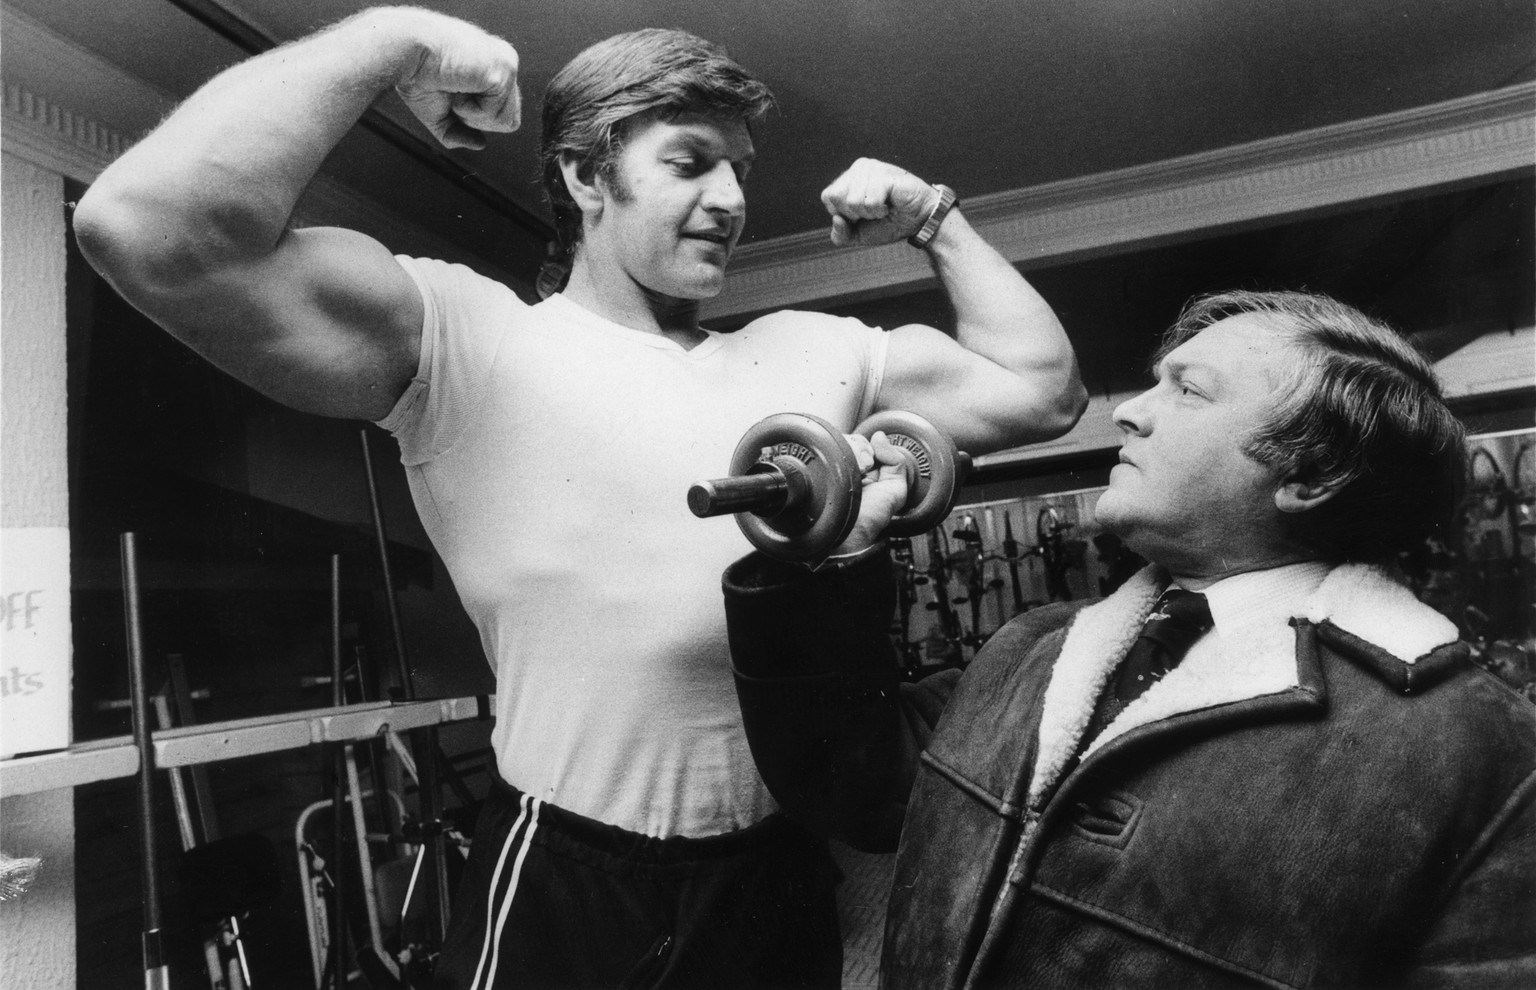 You Can Be Like Me!
13th January 1978: A potential client admires Dave Prowse who works in the keep-fit department of Harrods. He also plays the role of Darth Vader in Star Wars. (Photo by Colin Davey ...